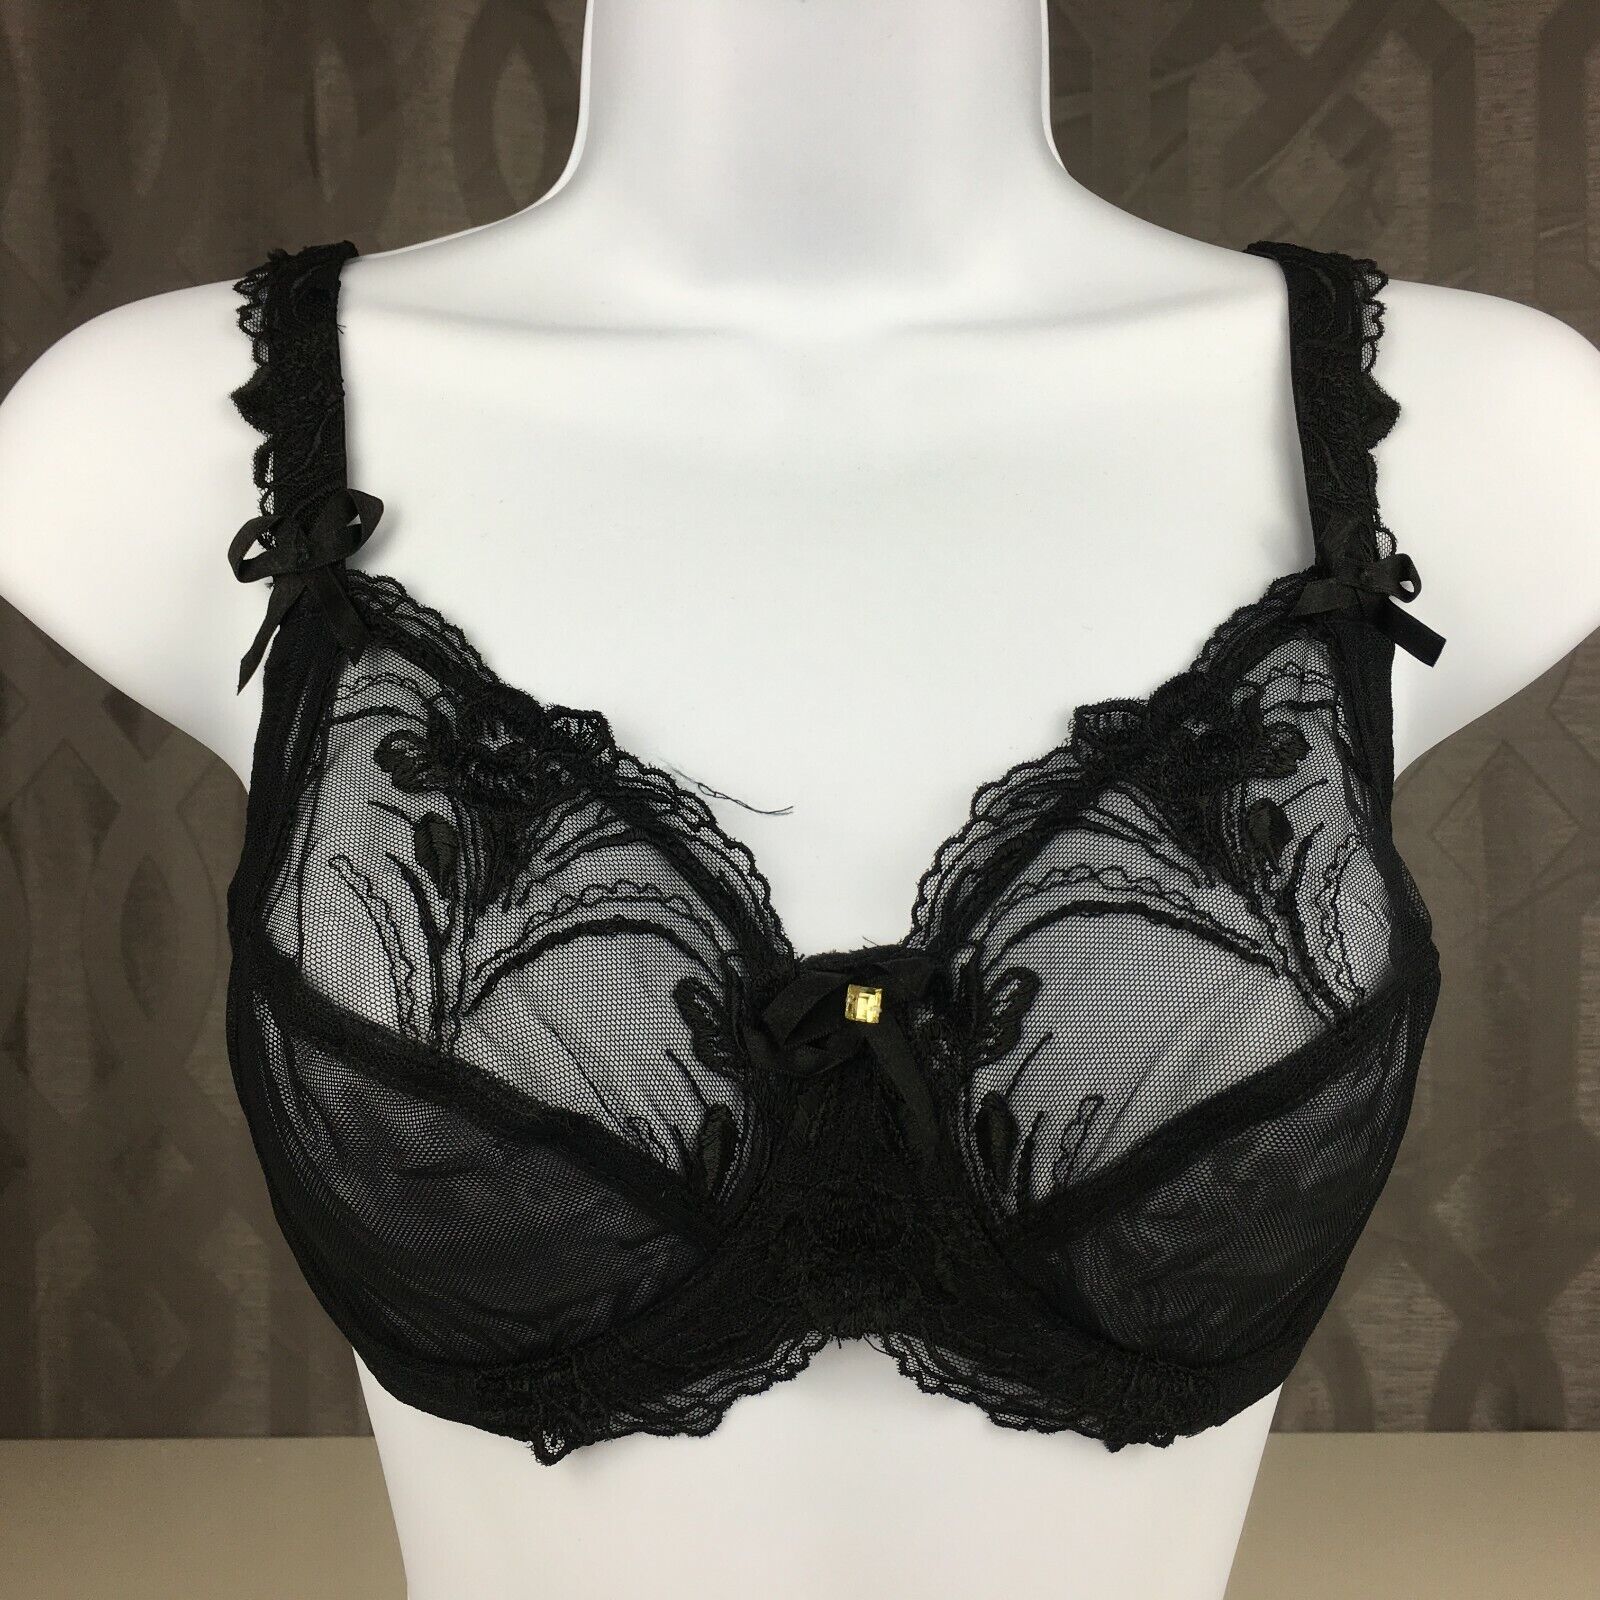 ALEGRO Sheer with Lace Underwire Sexy Lingerie Bra - Black 9006 - 30-40 NWT